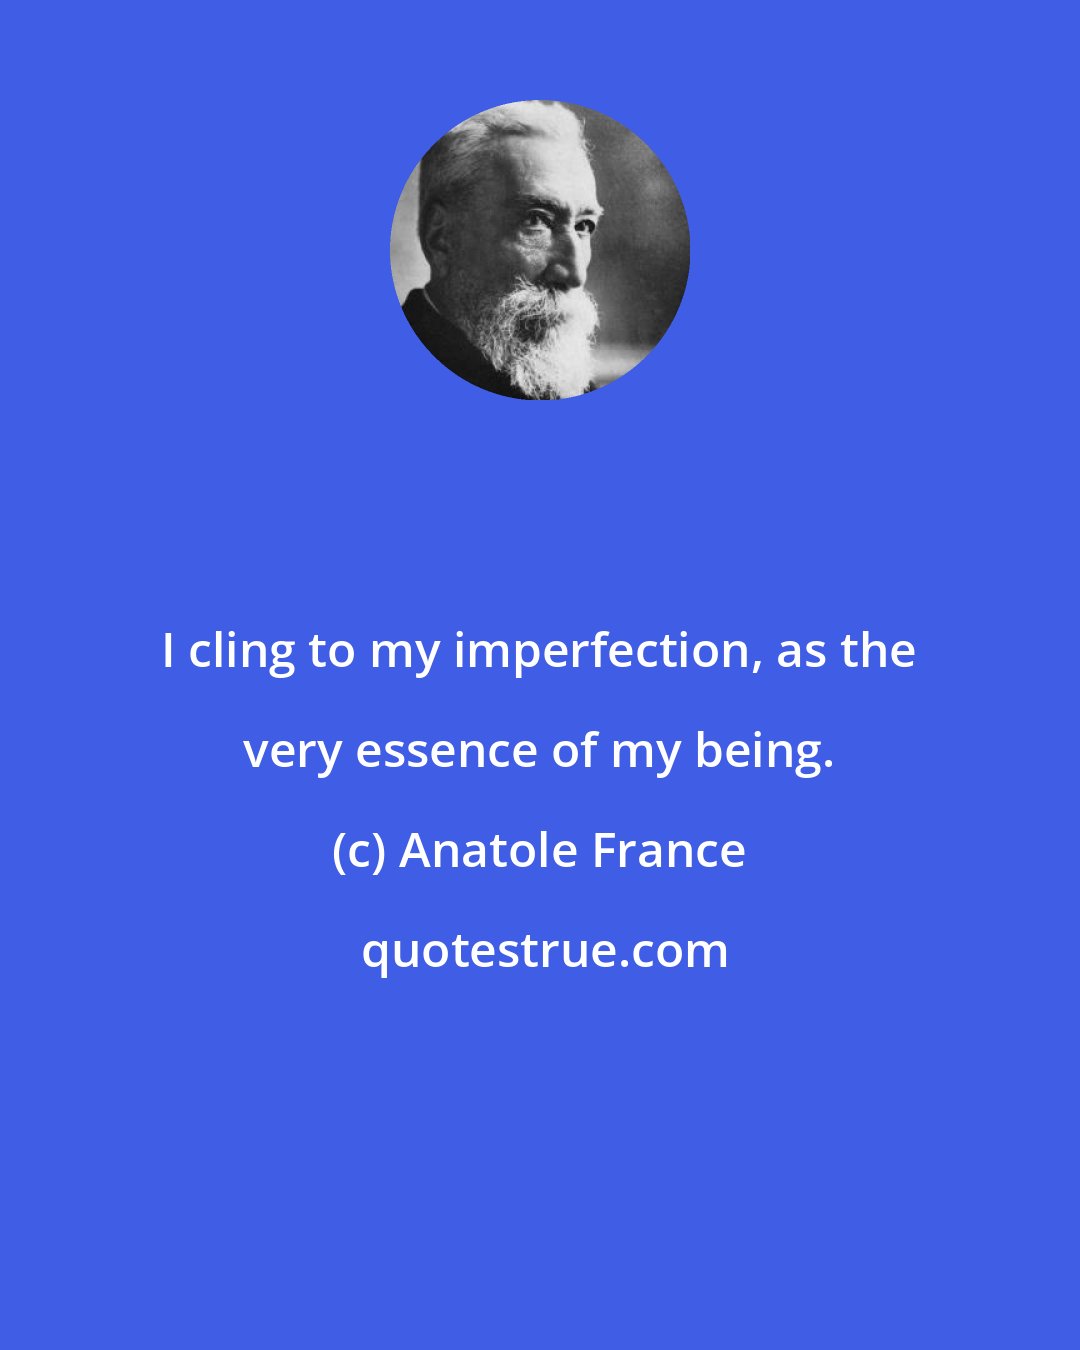 Anatole France: I cling to my imperfection, as the very essence of my being.